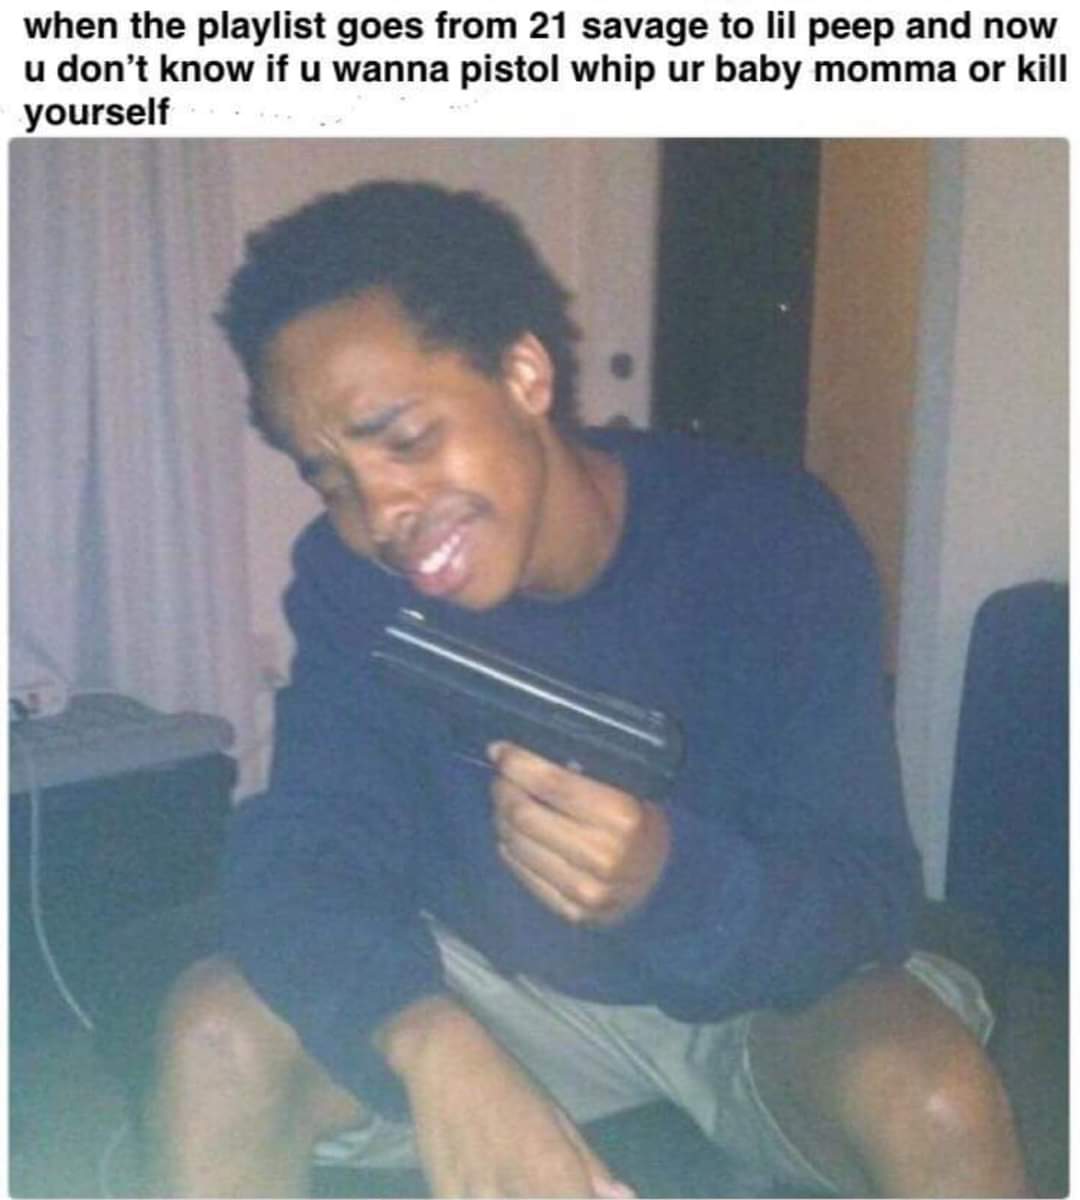 #ThrowbackThursday 

To this classic meme.

@earlxsweat
@21savage

#earlsweatshirt #21savage #lilpeep #rap #rapper #hiphop #hiphopculture #cinemaloco #meme #memes #comedy #humor #funny #memepage #memesdaily #dailymemes #memesfunny #funnymemes #memeoftheday 

- Mike Sandwich